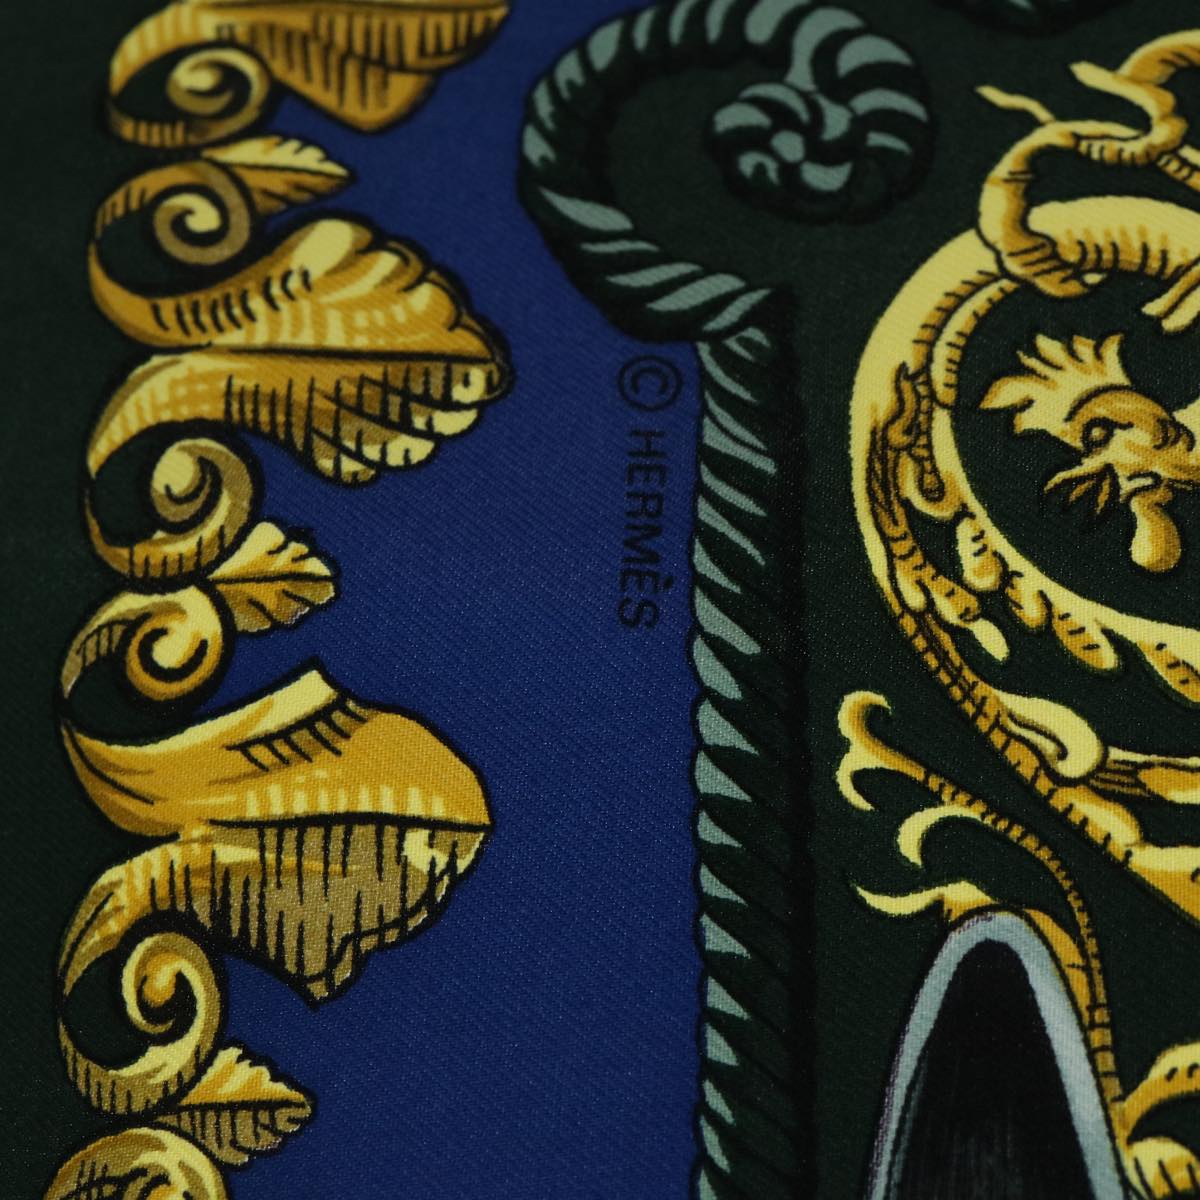 HERMES Carre 90 LVDOVICVS MAGNVS Scarf Silk Green Blue Auth bs8319